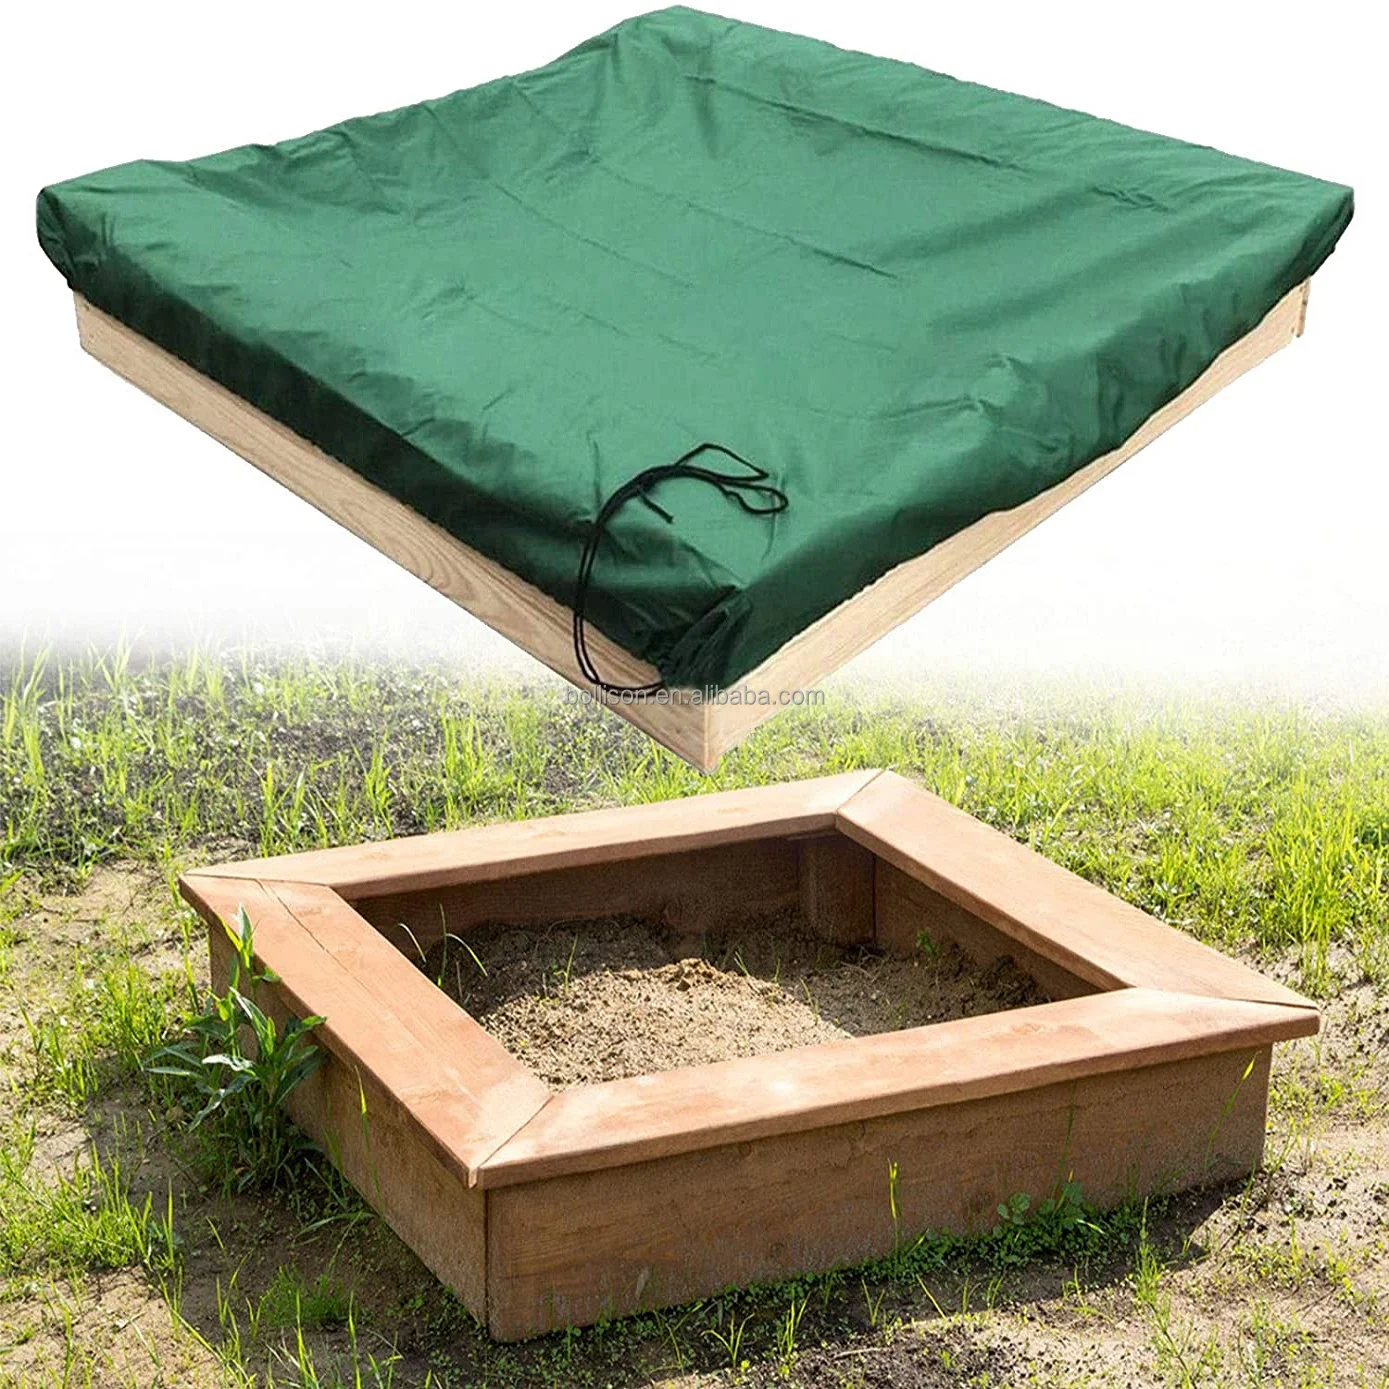 Square Protective Cover Sandpit Sandbox Cover with Drawstring Waterproof Sandbox Cover Dustproof Oxford Cloth Sandbox Canopy for Garden Home Pool Outdoor Black, 47 x 47 Inch 